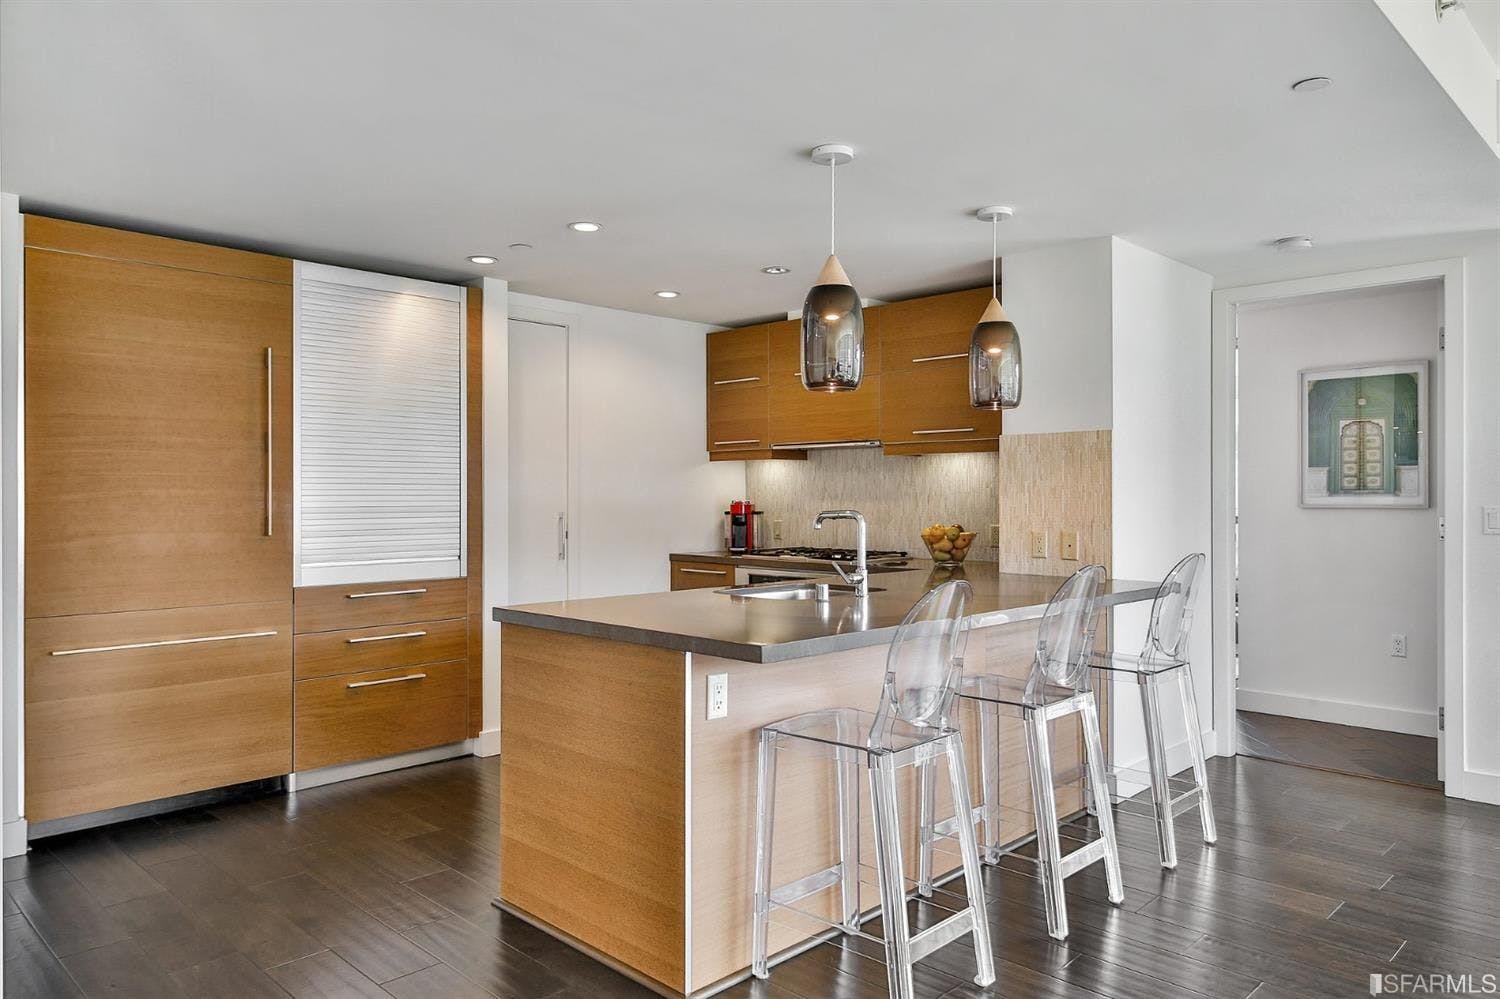 The kitchens in the Madrone are adorned with Caesarstone countertops and stainless steel Bosch appliances, as well as stylish wooden cabinetry. 